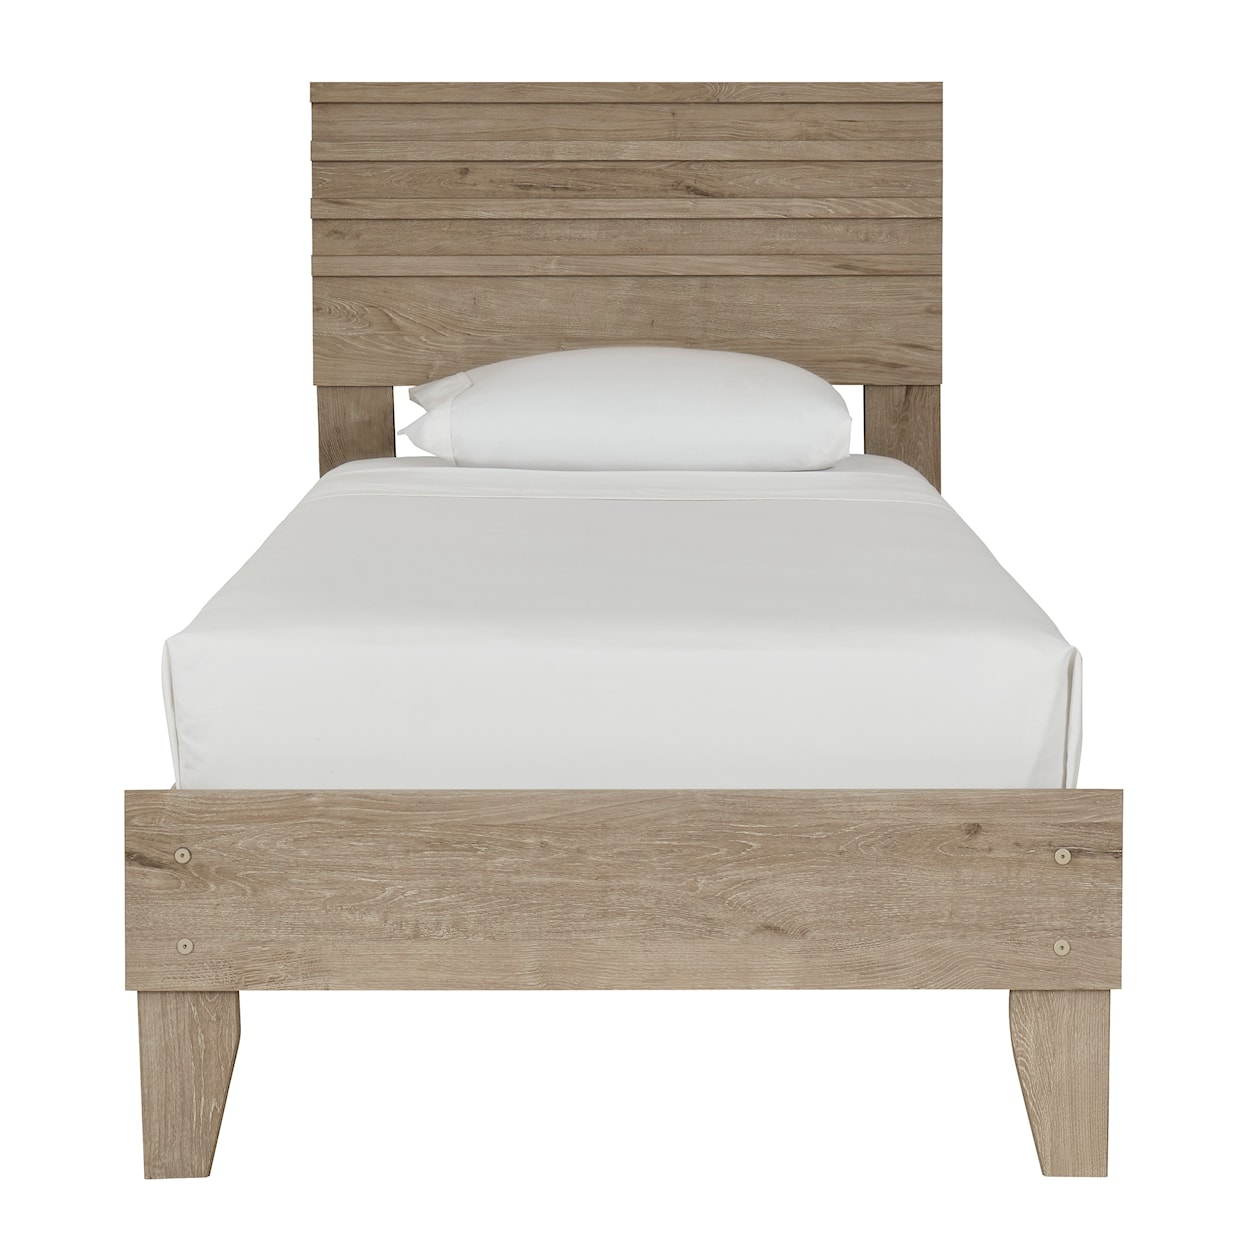 Signature Design by Ashley Oliah Twin Panel Platform Bed